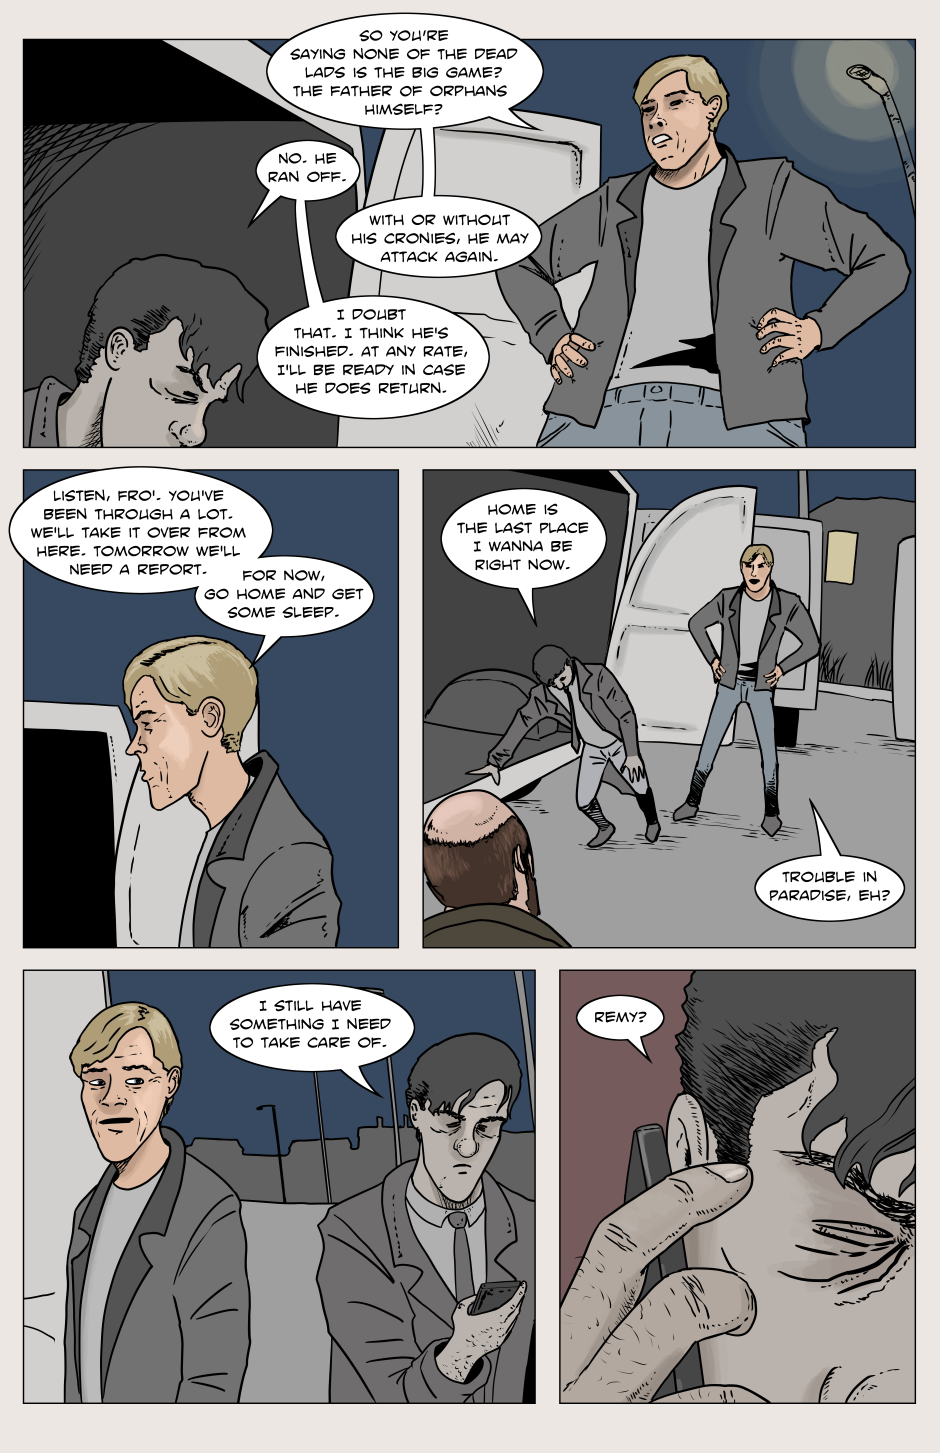 The Frolic #6, page 22